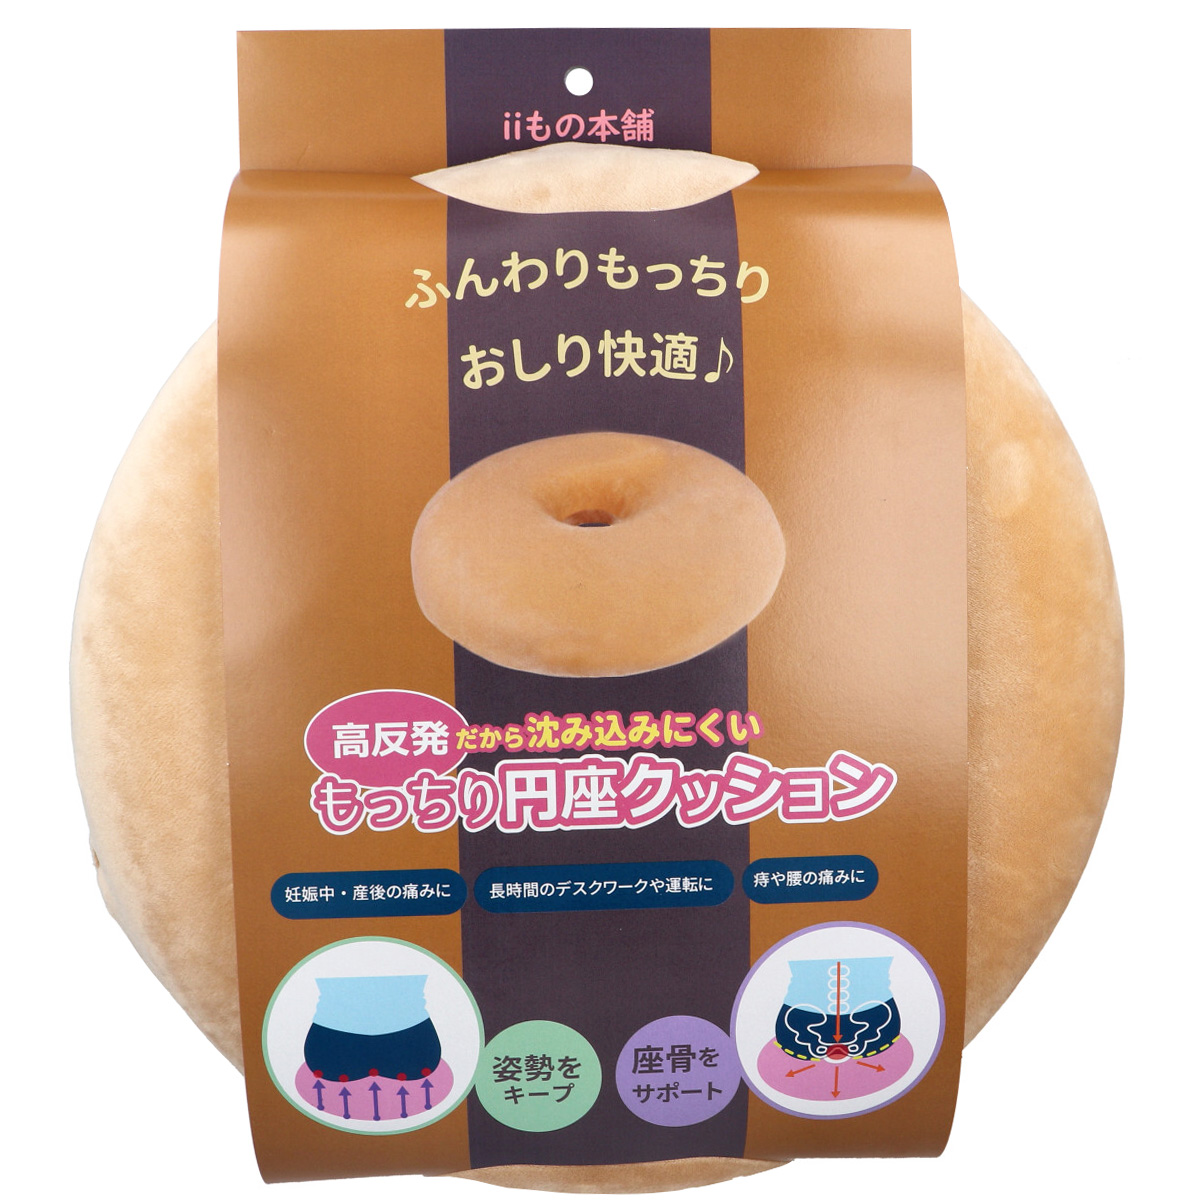 Picture of Beige color High Resilience Donut Cushion